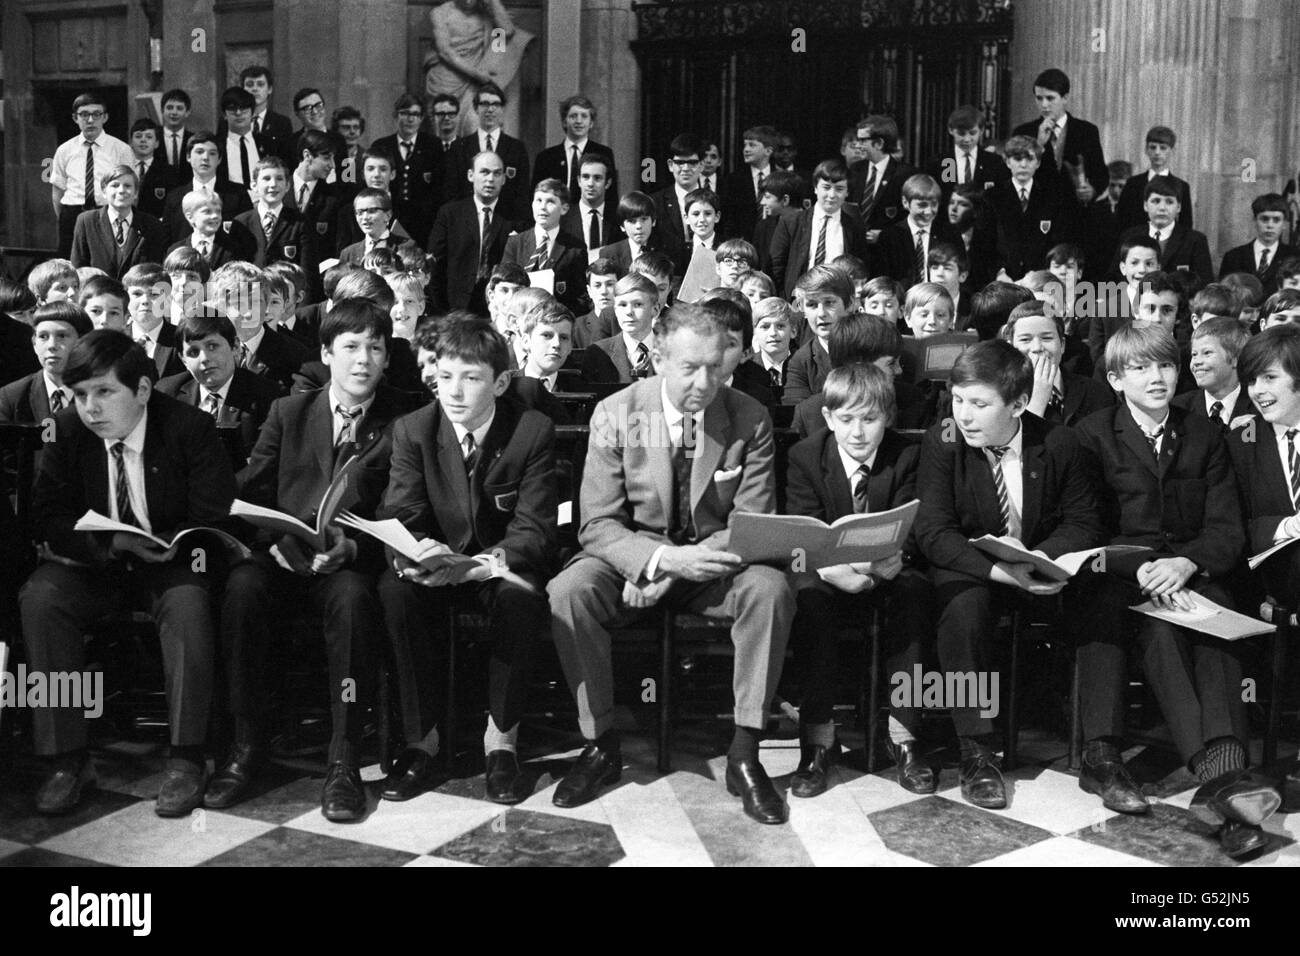 Benjamin Britten, seated in the front row with some of the Wandsworth School Boy's Choir in St. Paul's Cathedral, when they rehearsed his latest work 'Children's Crusade', Op.82, a ballad for children's voices and orchestra. The work was written to mark the occasion of the Jubilee of The Save the Children Fund. It will be sung by the Wandsworth School Boy's choir at the Fund's Interdenominational Thanksgiving Service at St. Paul's Cathedral and at the Aldeburgh Festival in June by the same choir. The words were taken from the text of German poet and dramatist Bertold Brecht, and the ballad Stock Photo